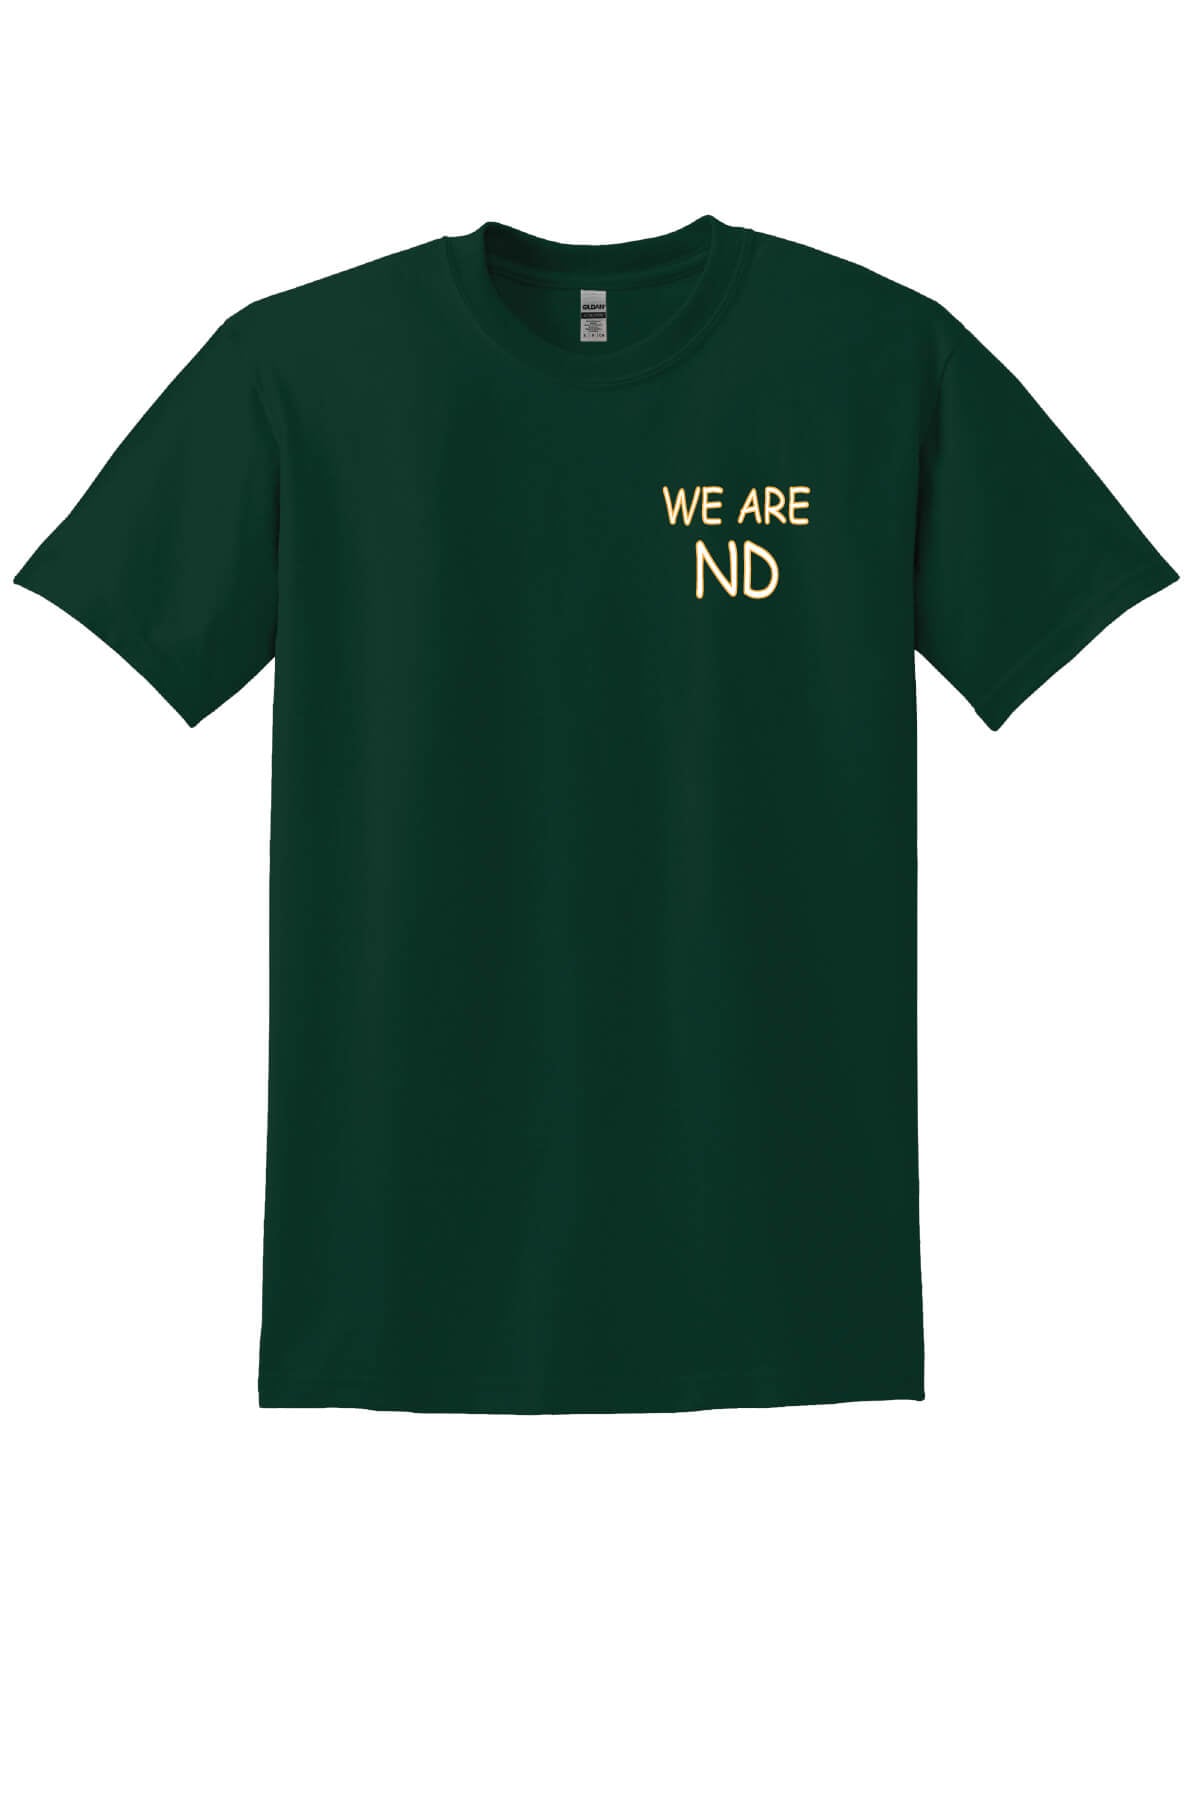 We Are ND Short Sleeve T-Shirt green